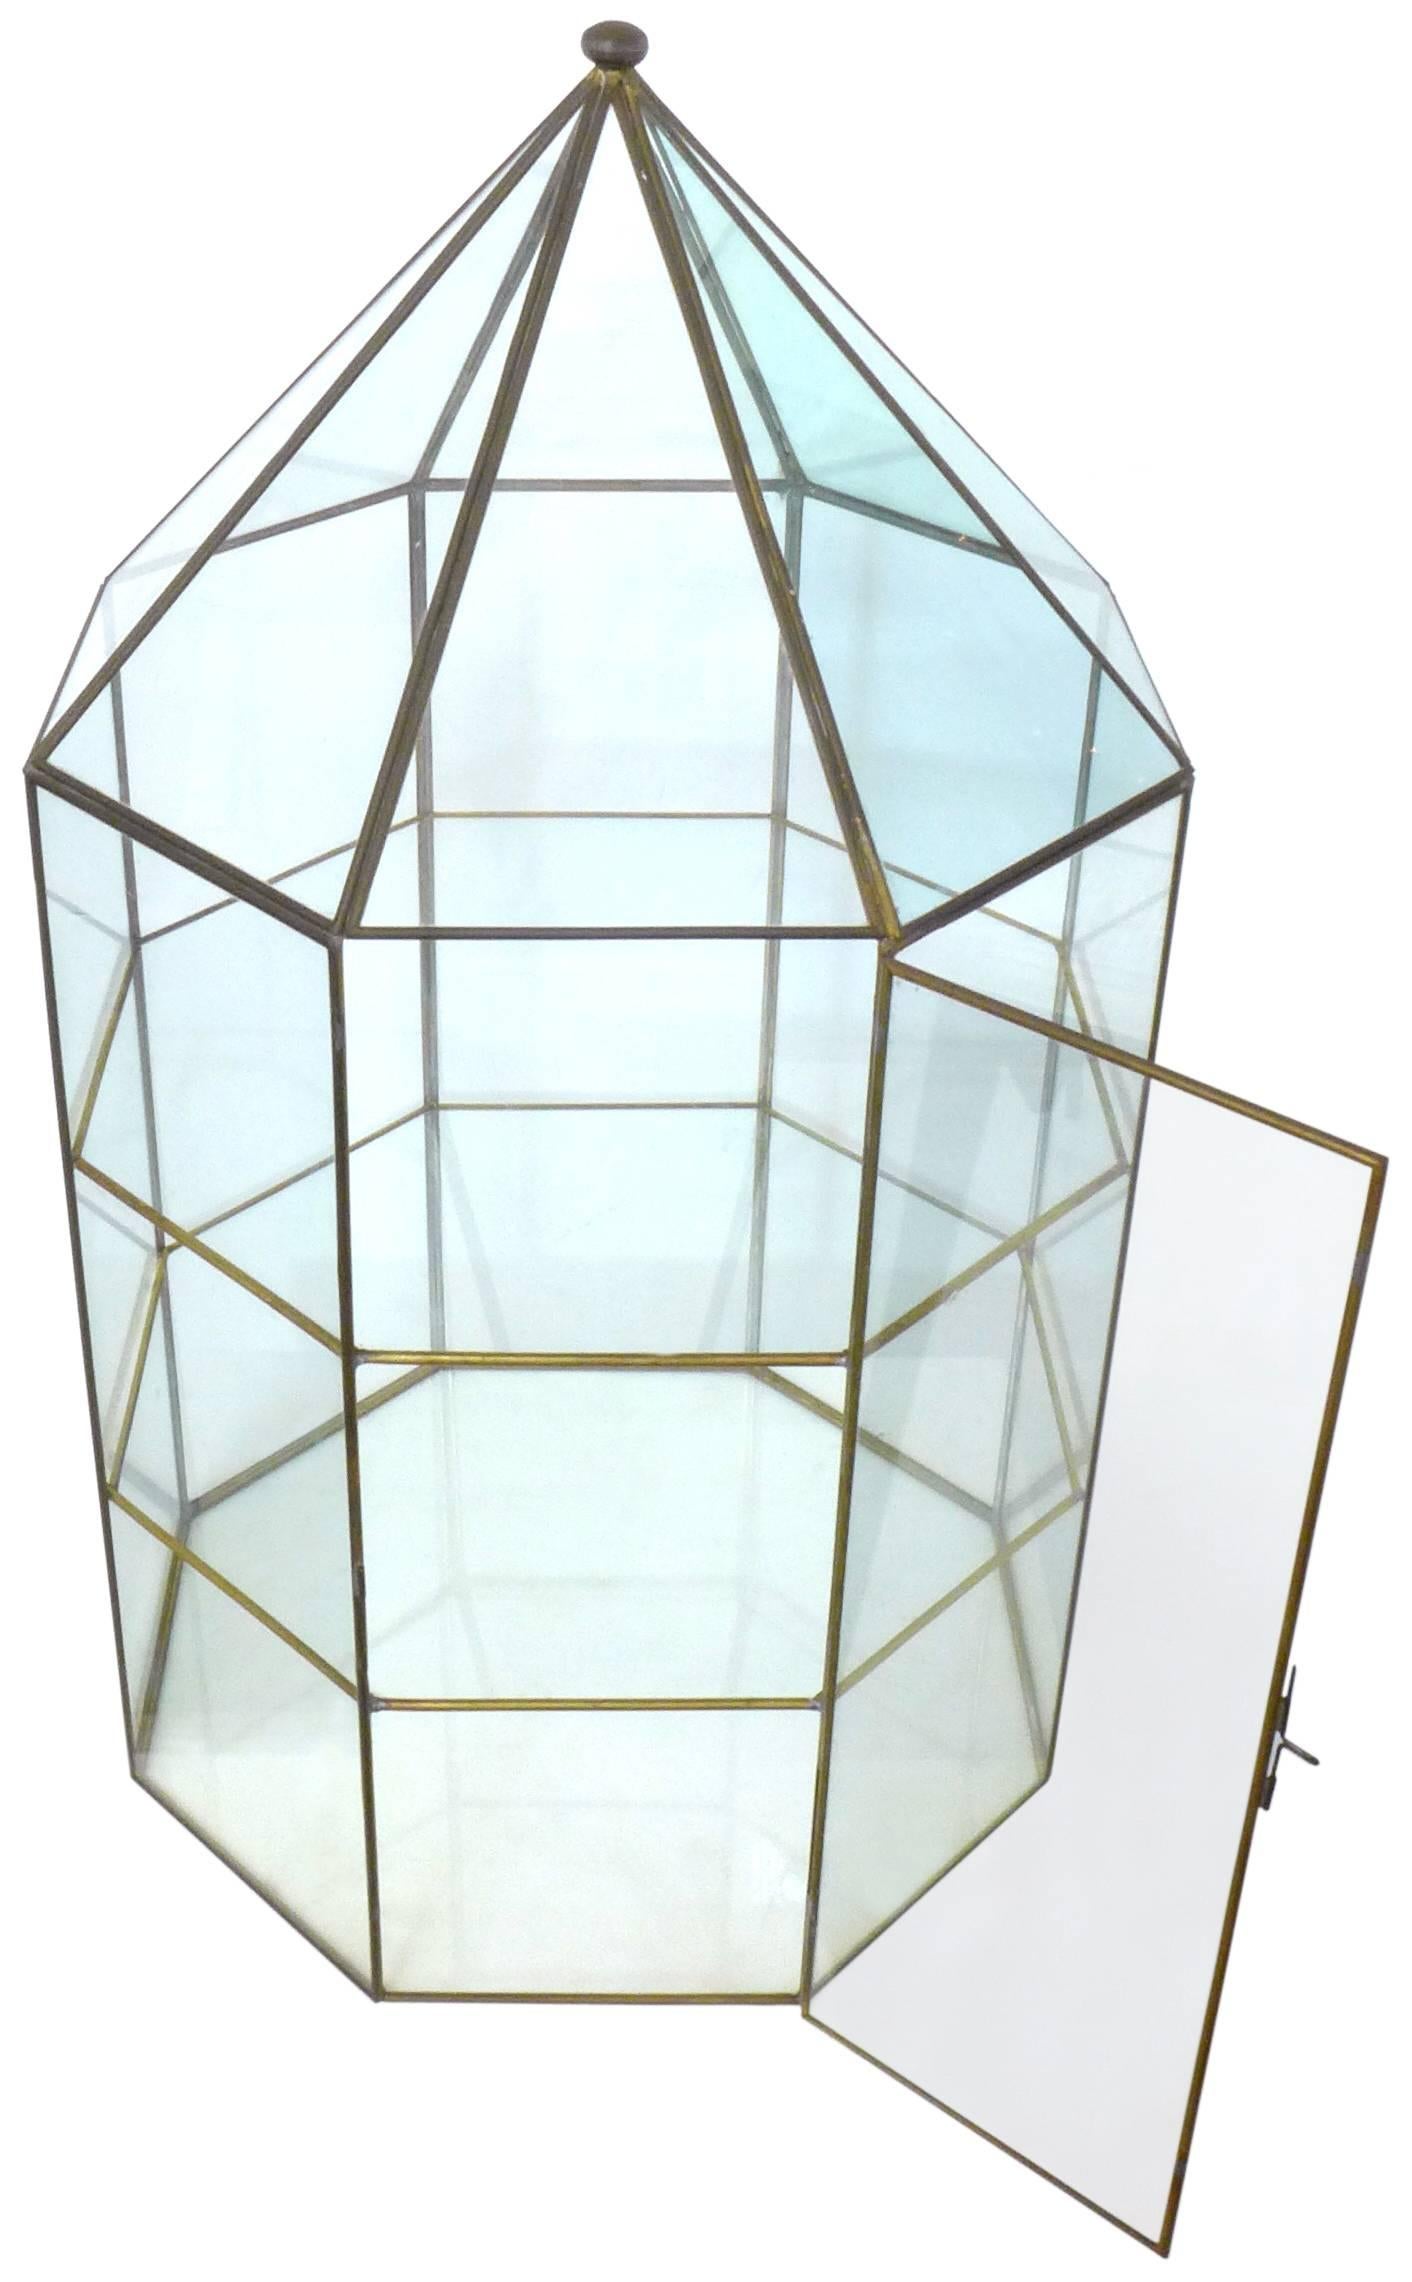 A beautifully crafted brass and glass vitrine. Delicate, perfectly-patinated brass frame-work holding each pane; an octagonally facetted-cylinder, pyramidally-tapering at the top to a small, spheroid finial. A nearly-indiscernible, single, latched